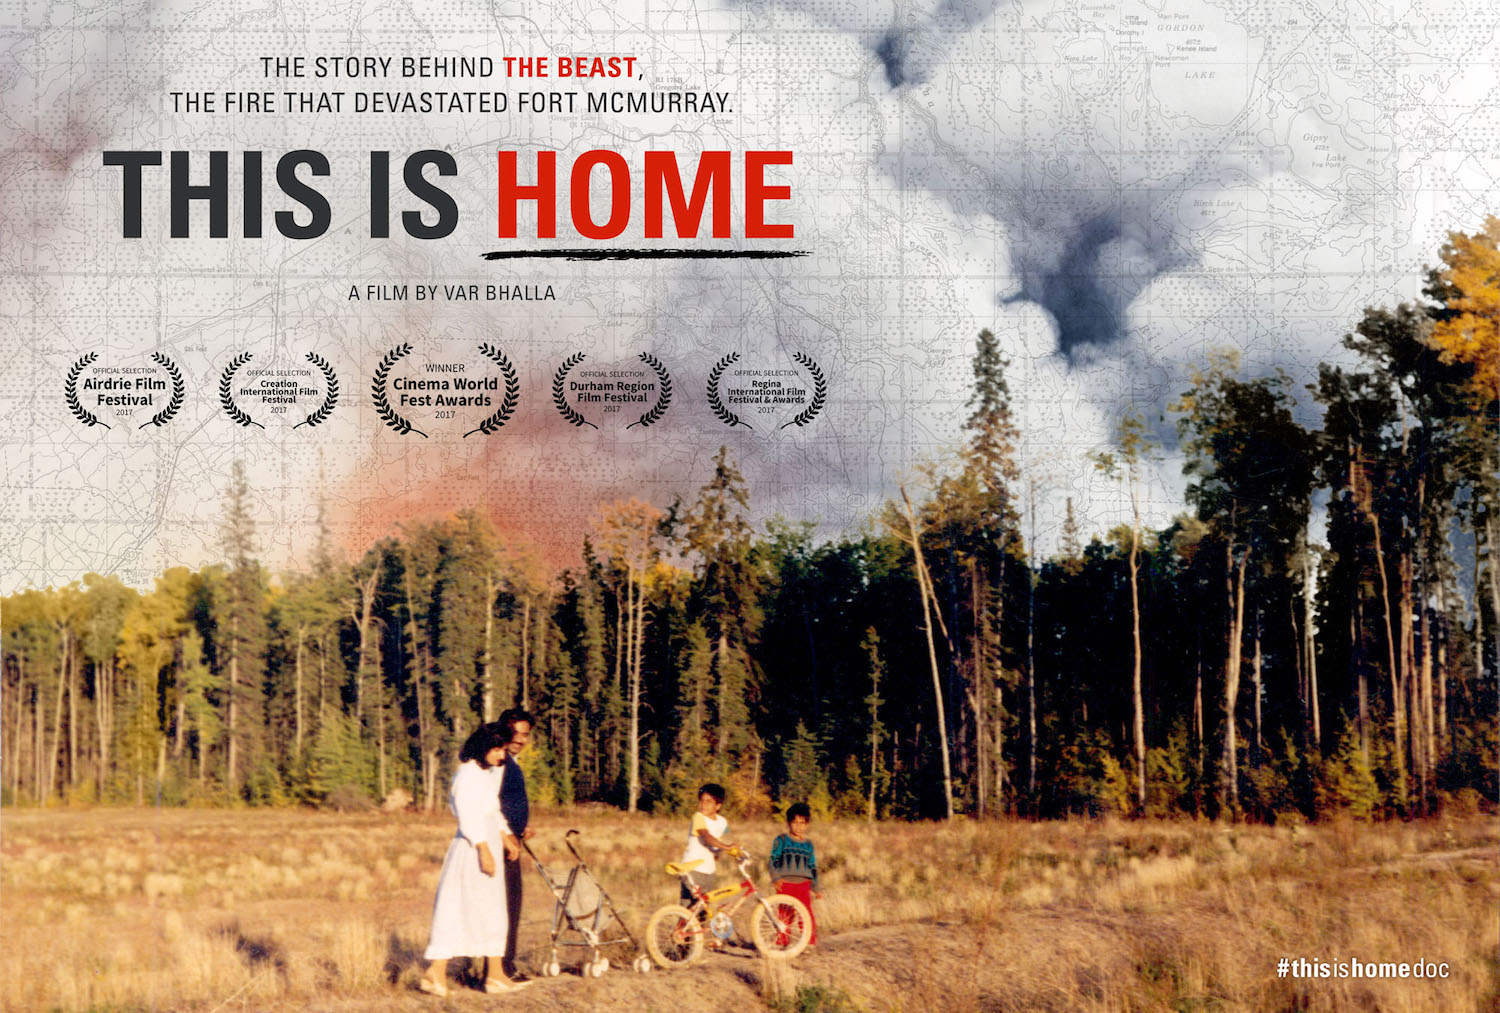 Interview with Var Bhalla on “This is Home”